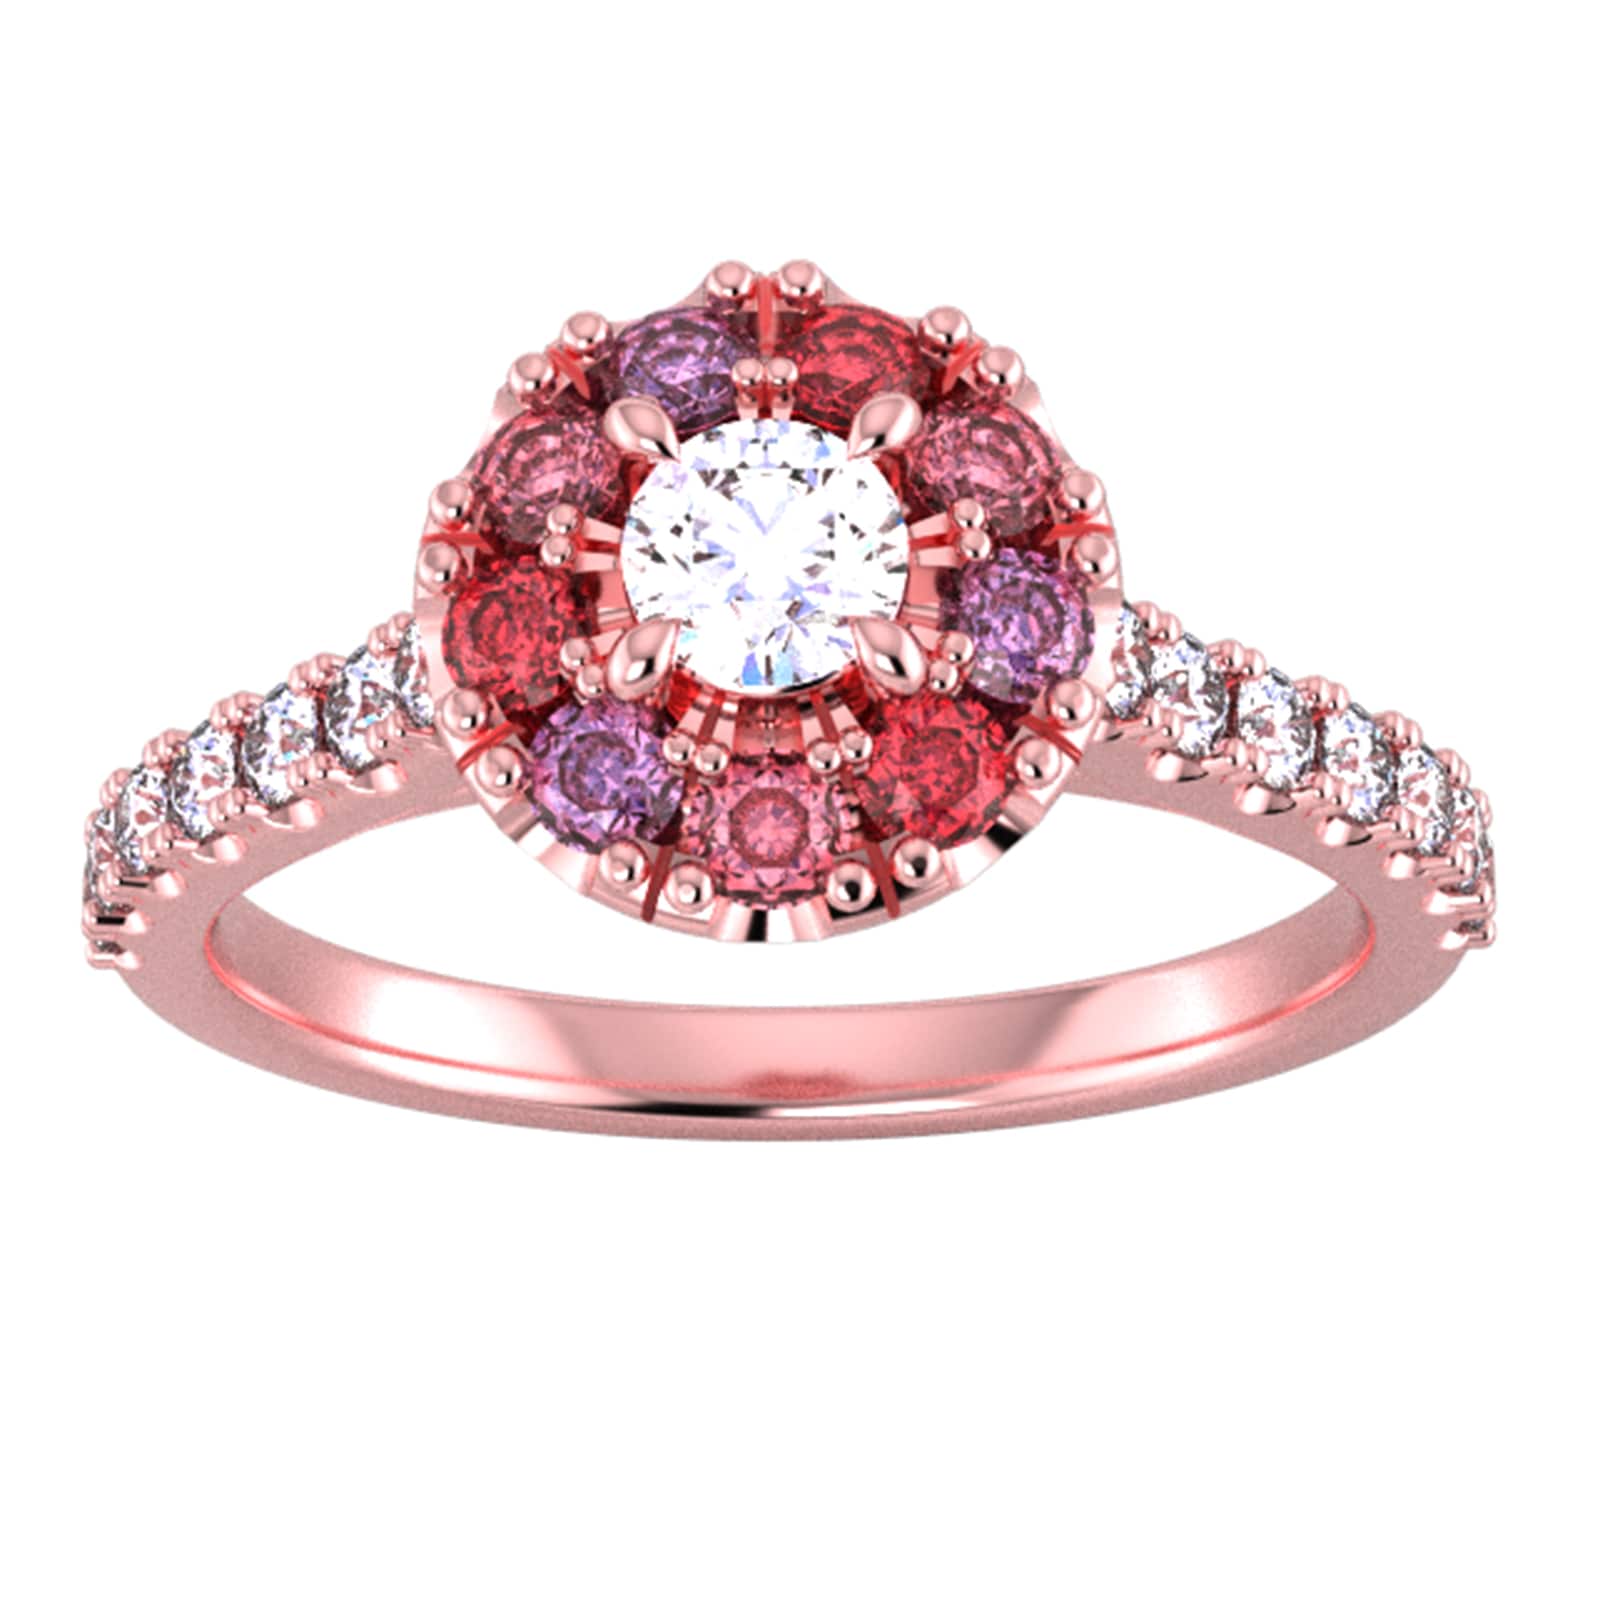 18ct Rose Gold Diamond & Red, Pink, Purple Sapphire Halo Ring - Ring Size W